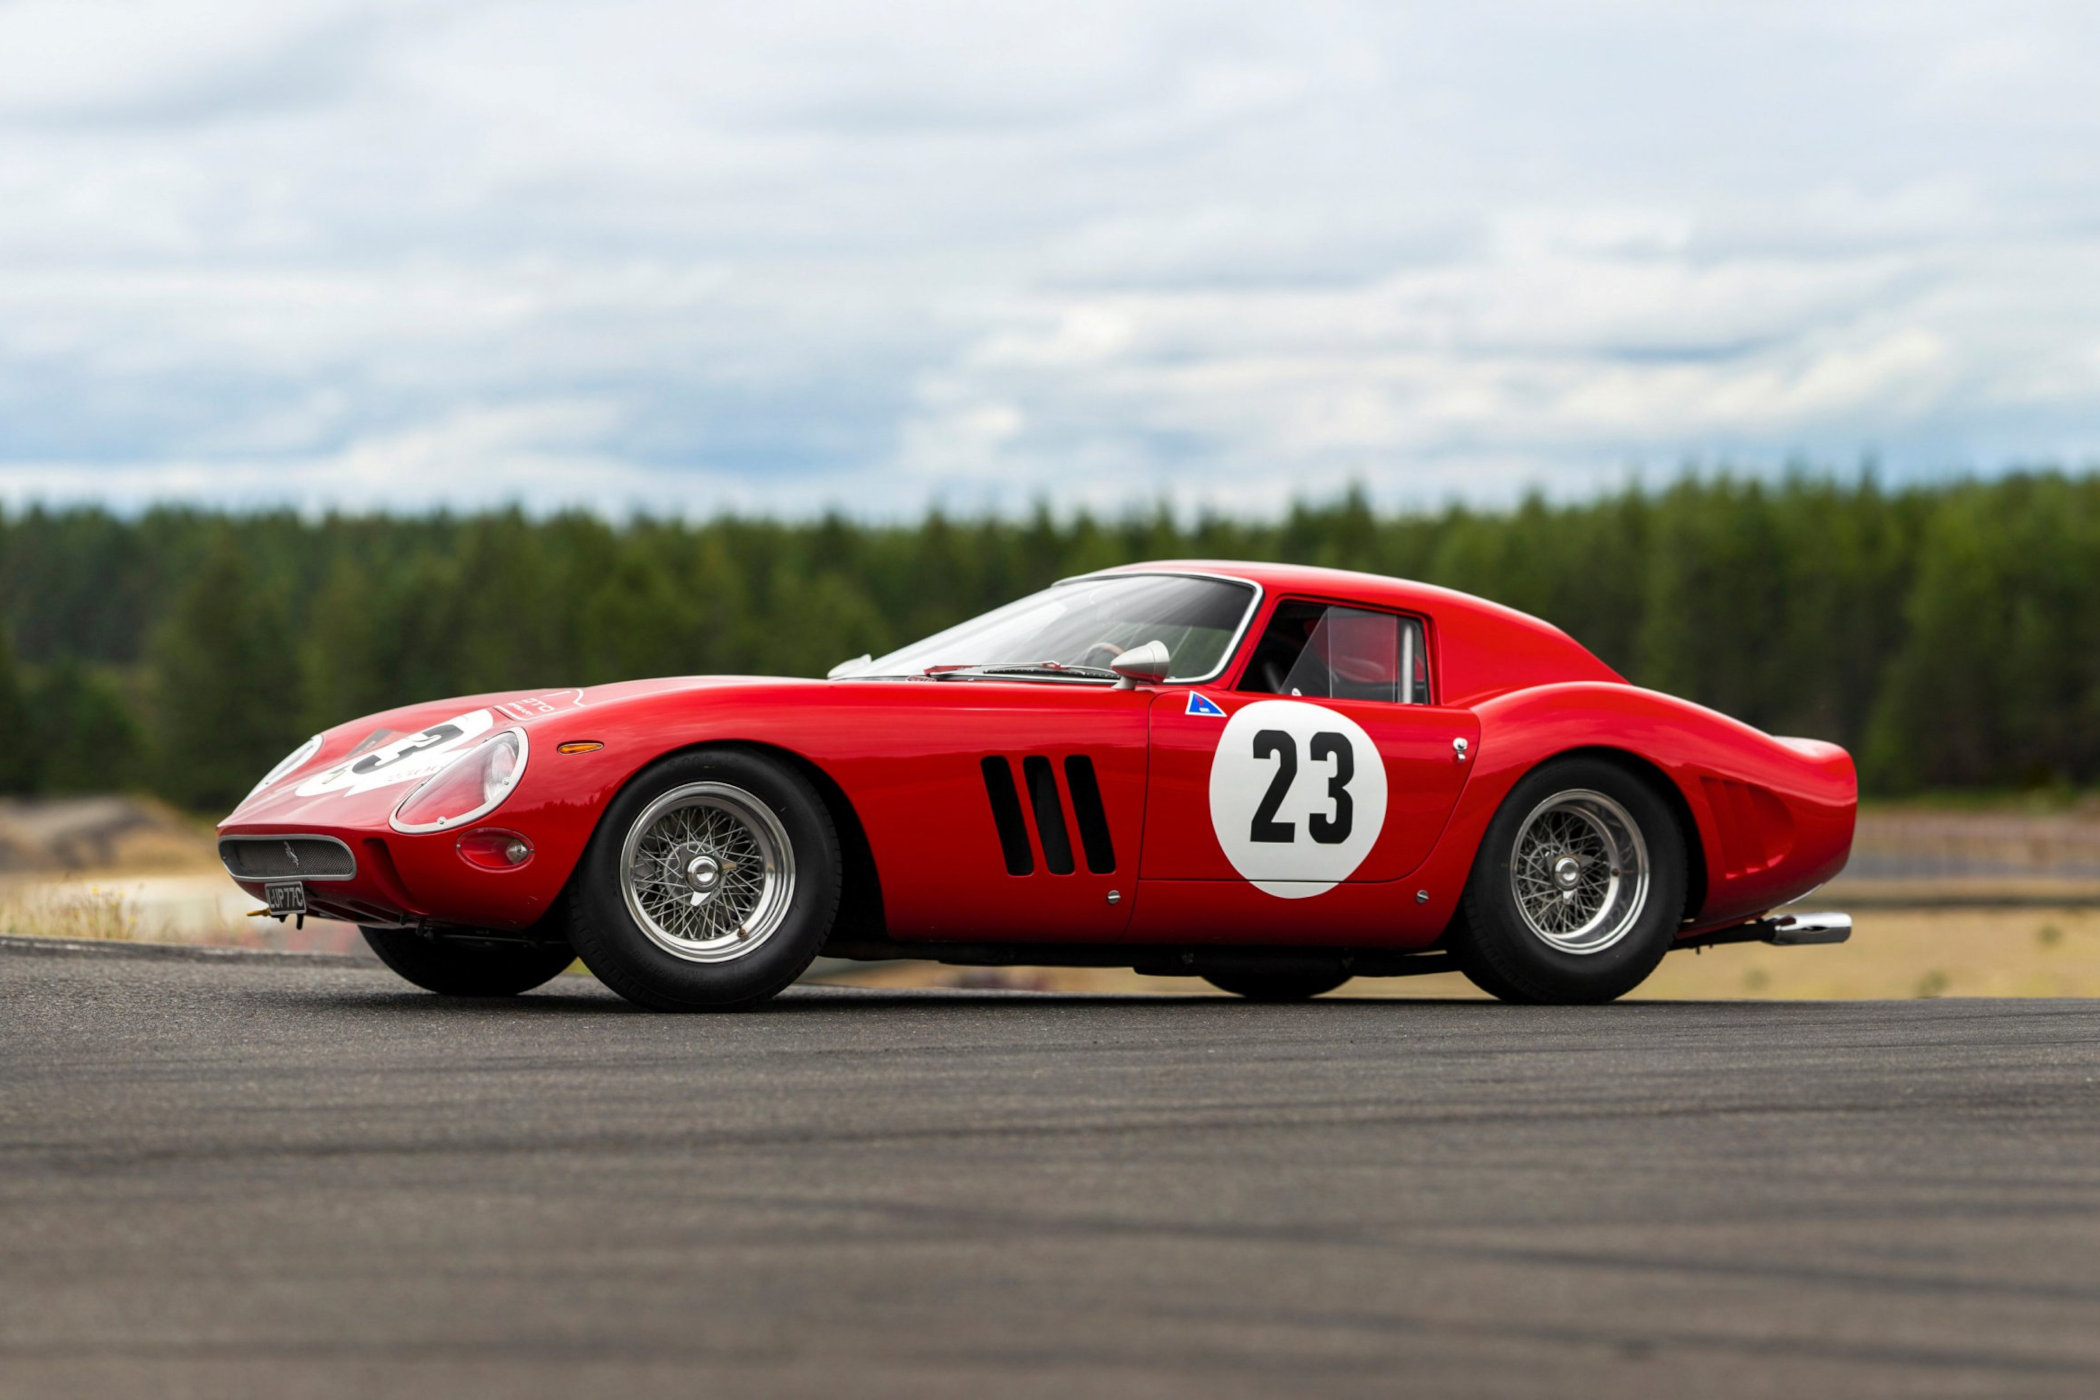 The record-breaking 1962 Ferrari 250 GTO - sold by RM Sotheby's i 2018 for USD 48,4 million